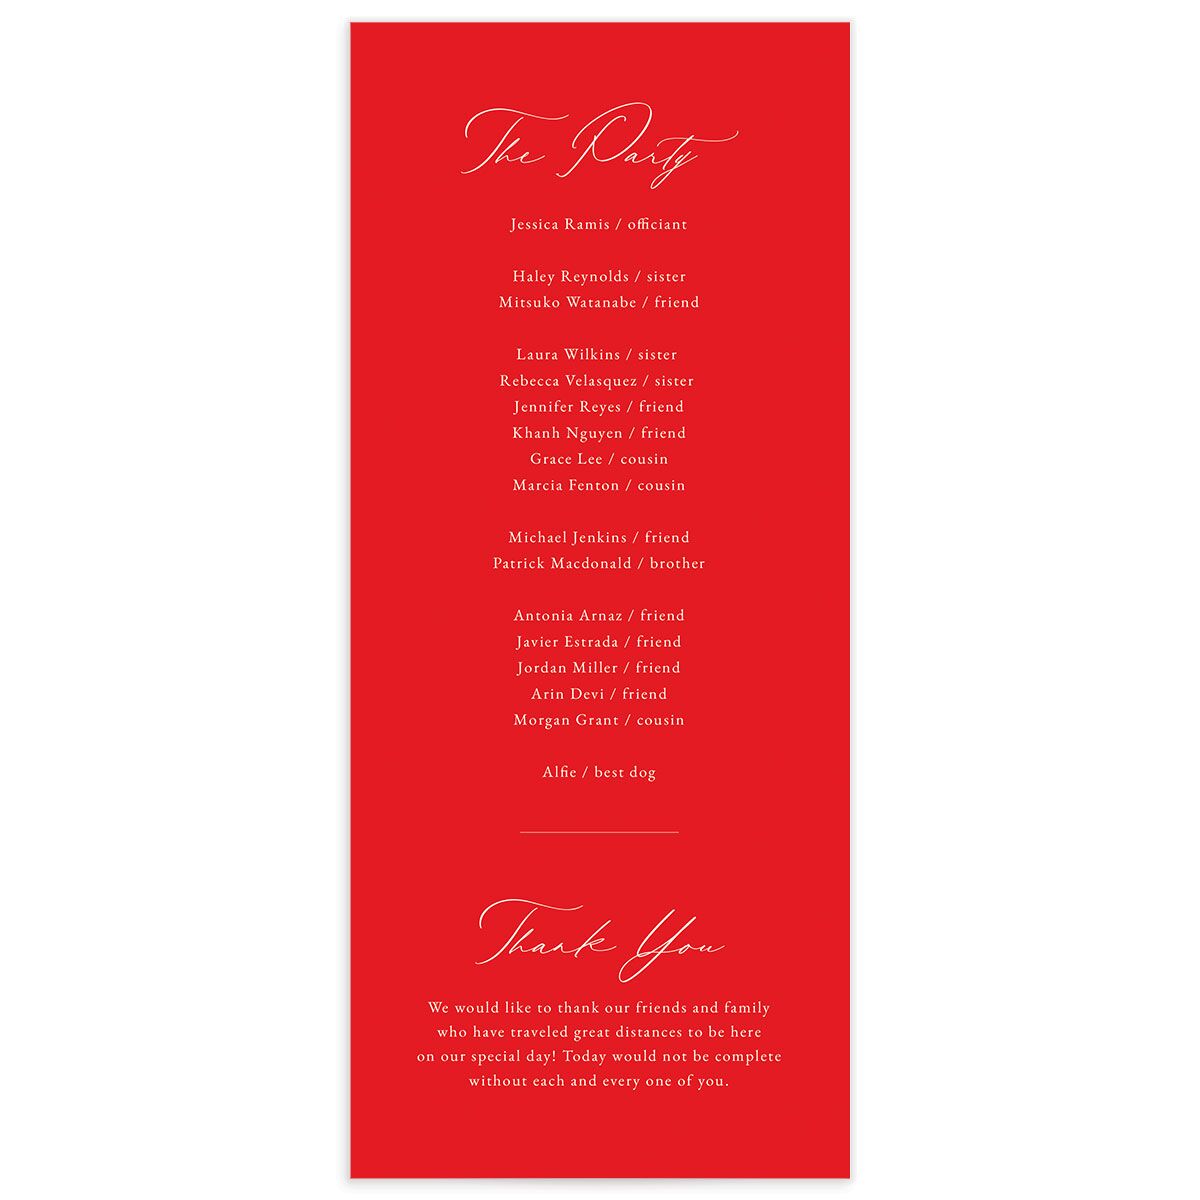 Double Happiness Wedding Programs back in red